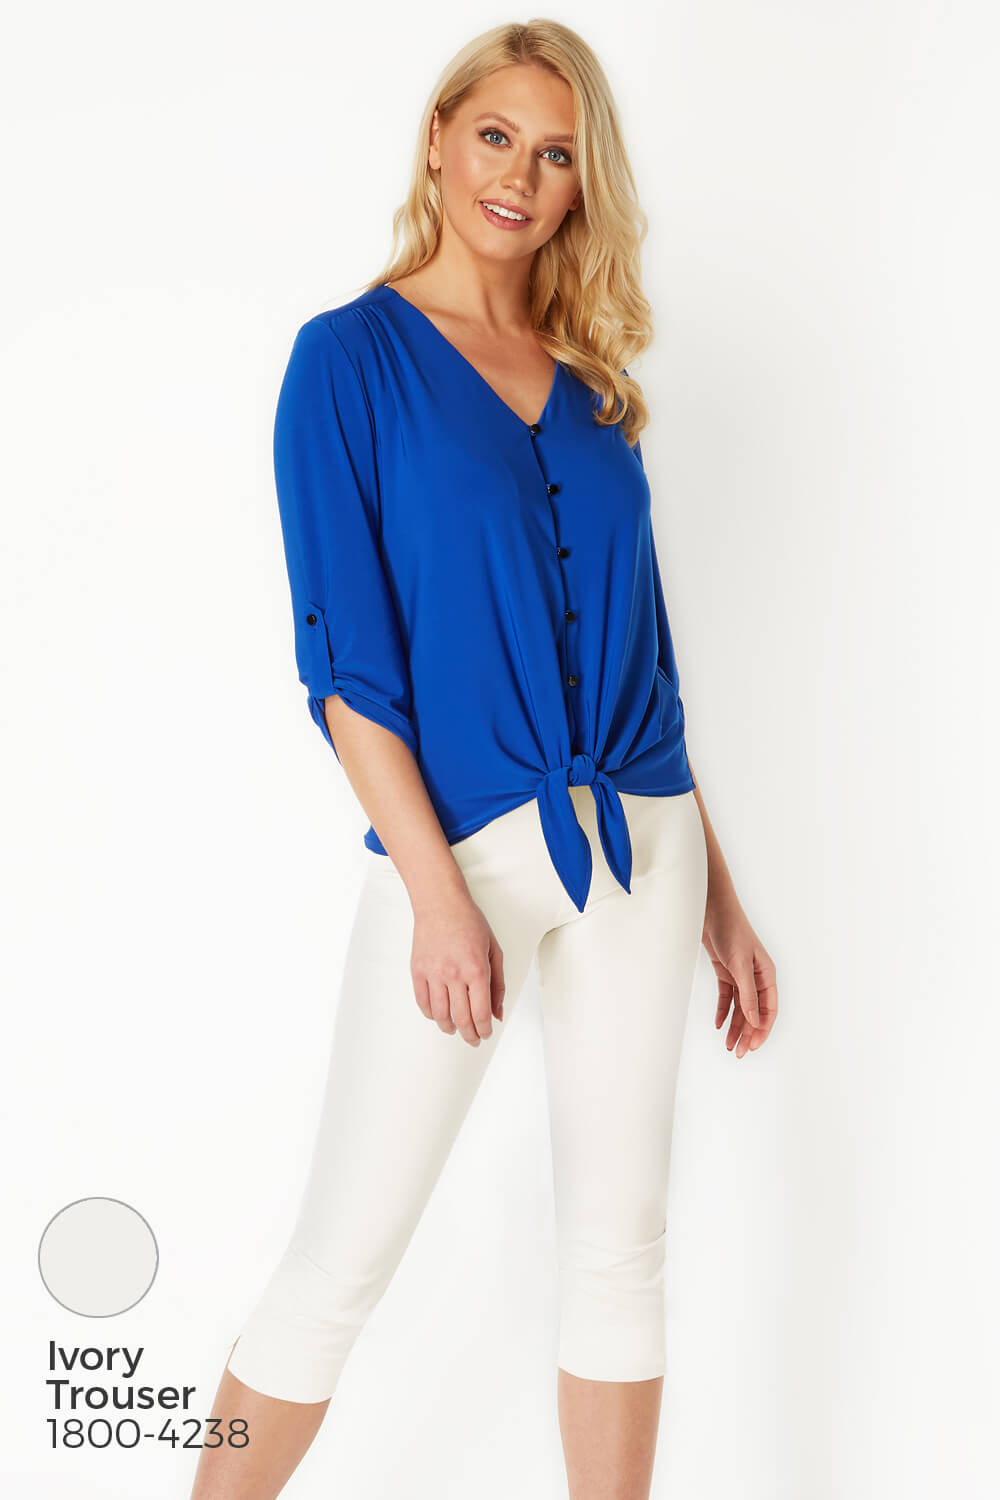 Royal Blue Tie Front Button Up Blouse, Image 8 of 8